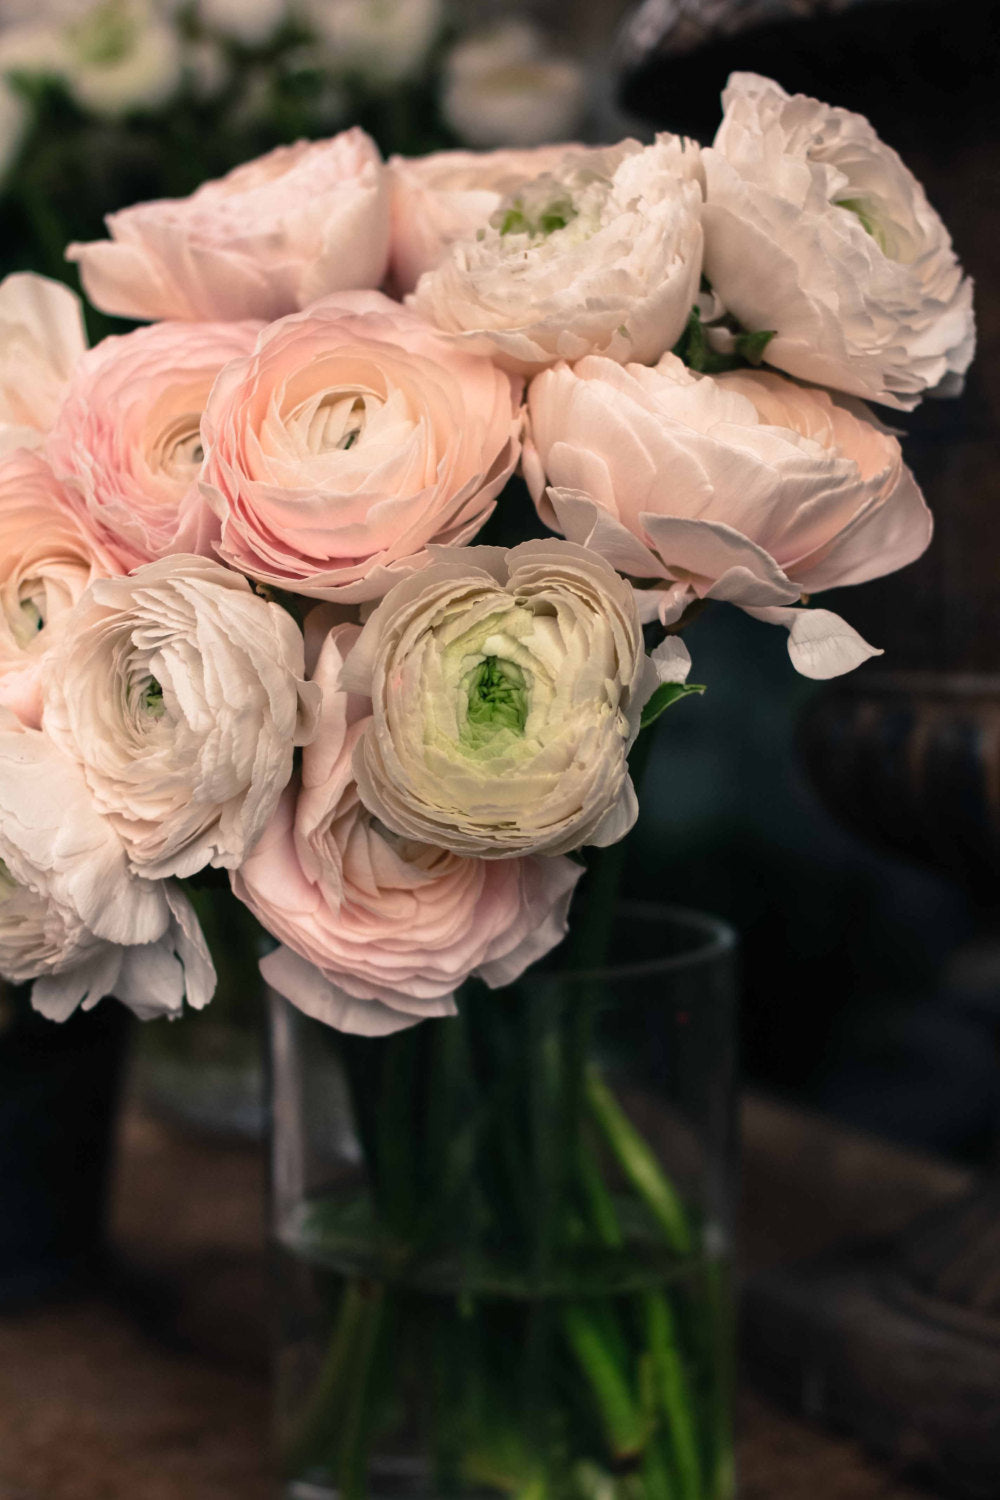 Pink Ranunculus for sale in Paris - Every Day Paris 